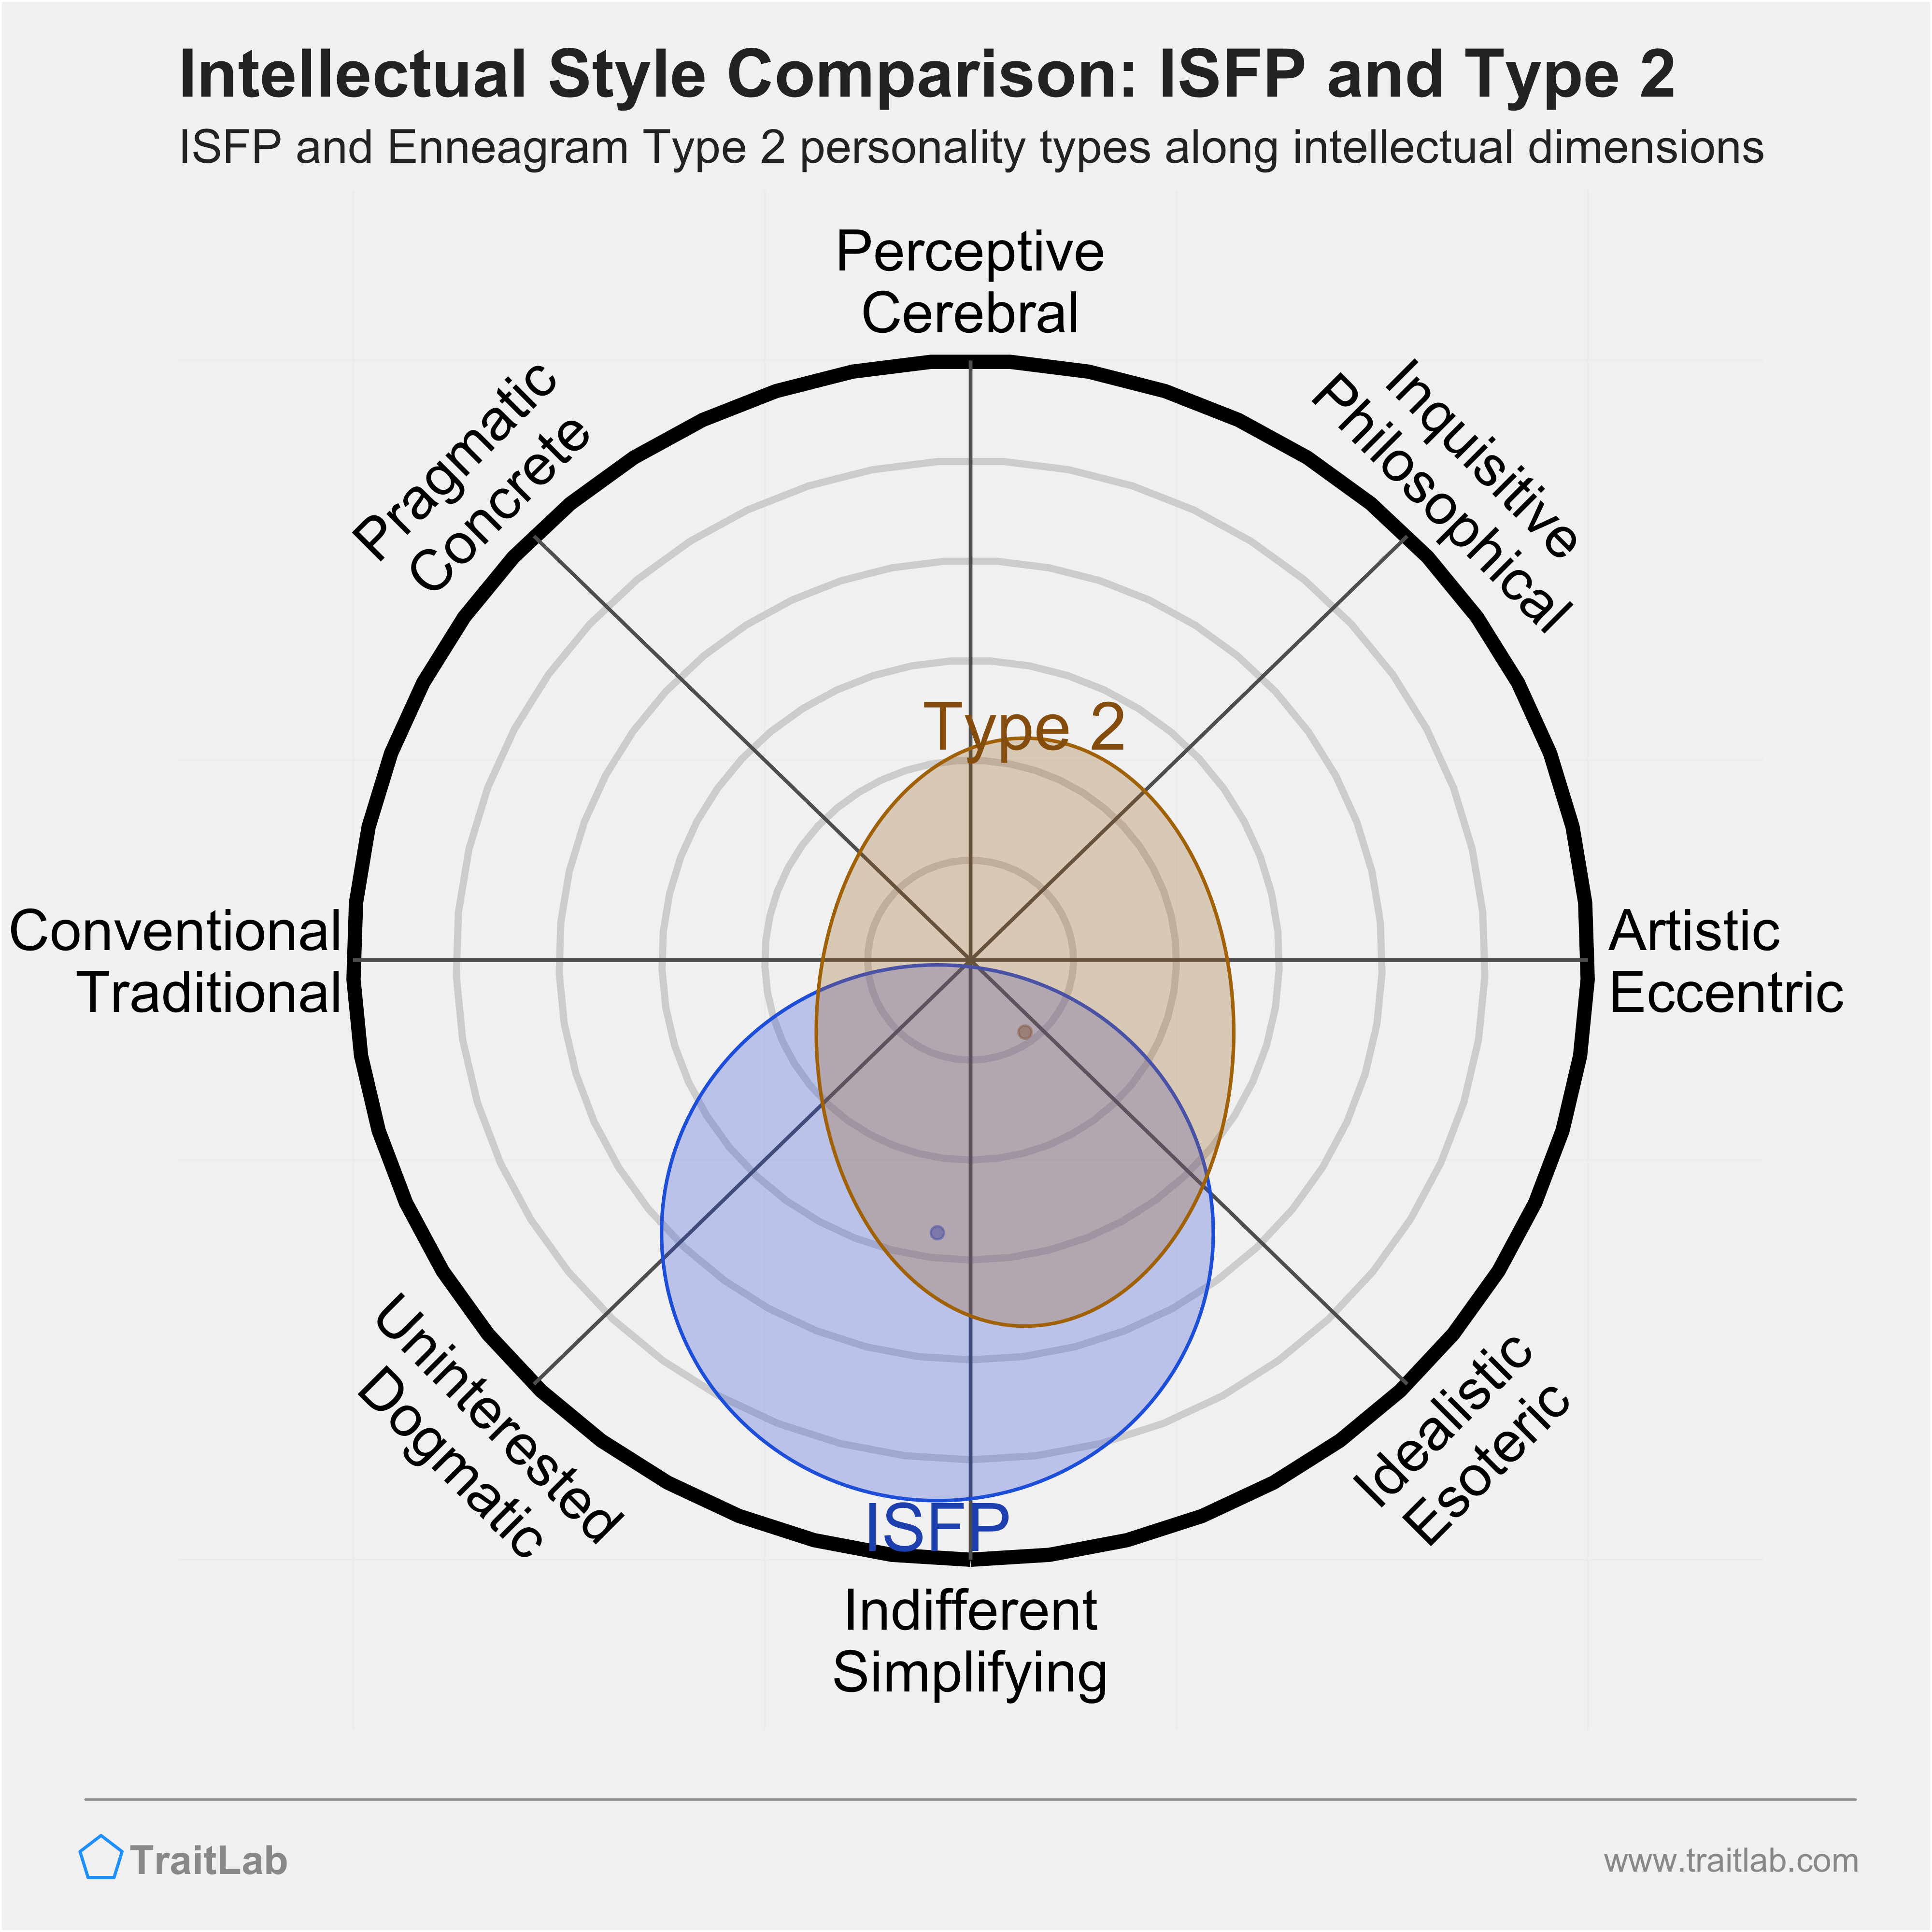 ISFP and Type 2 comparison across intellectual dimensions